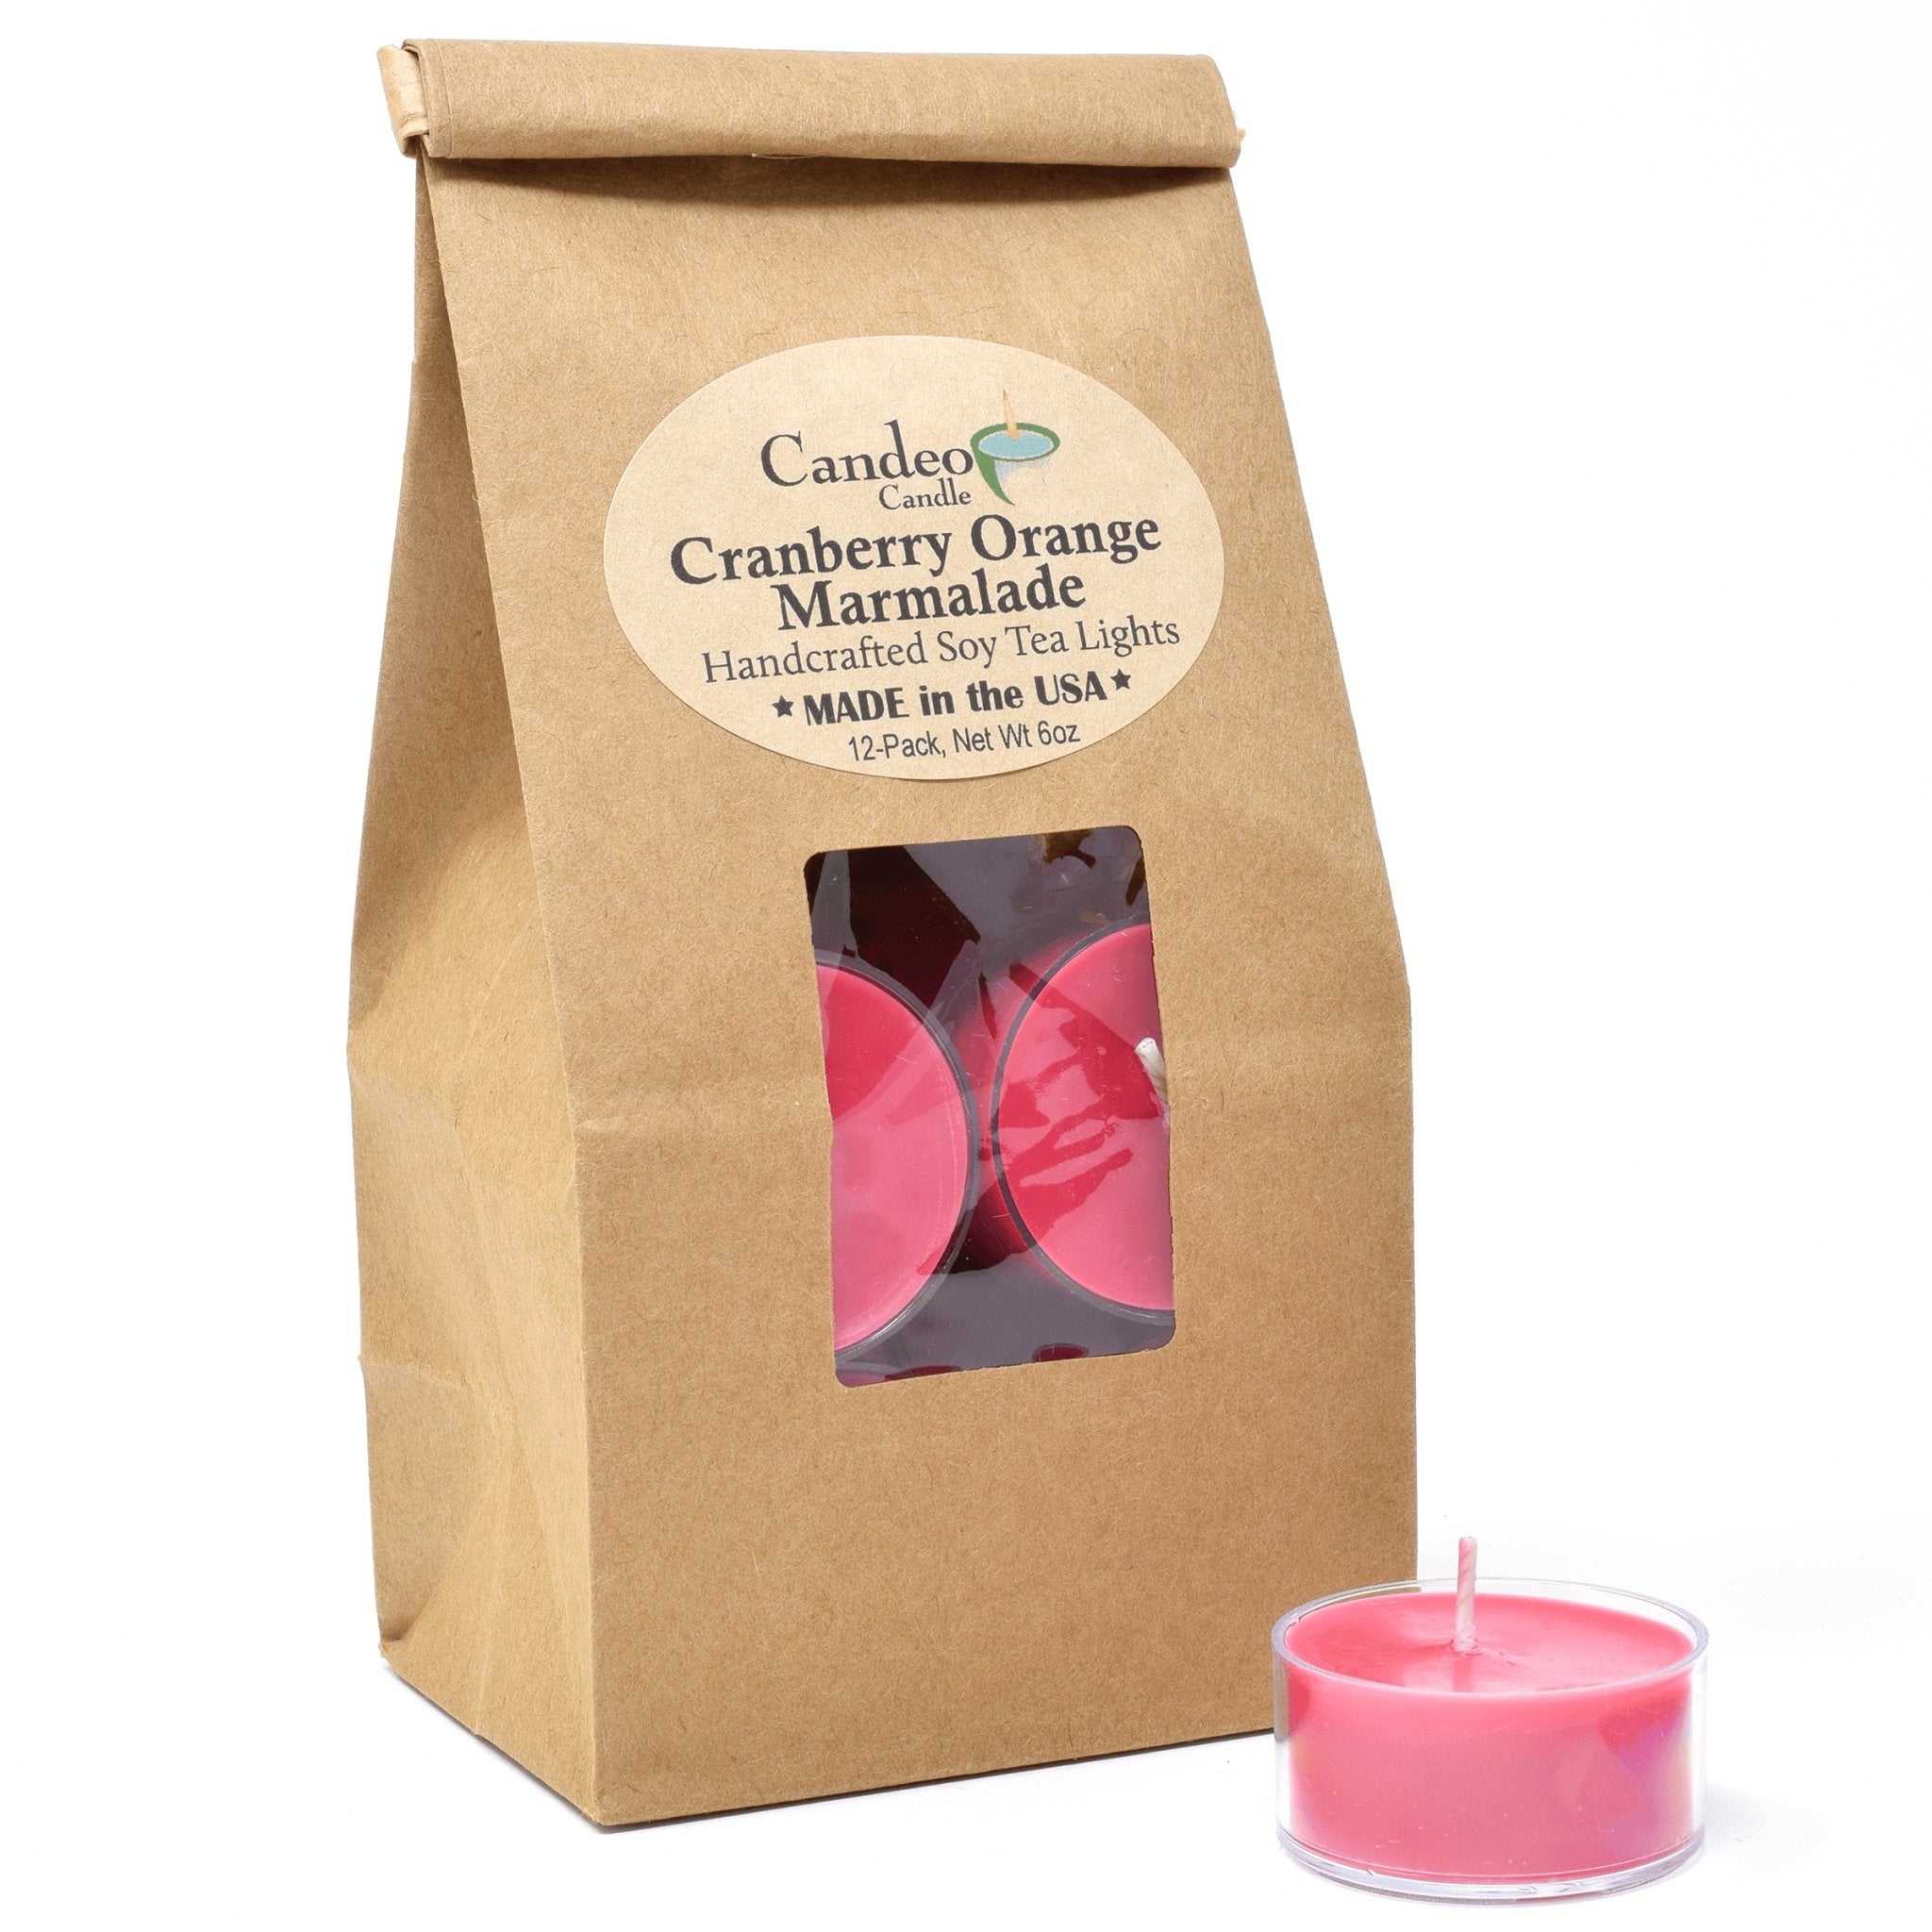 Cranberry Orange Marmalade, Soy Tea Light 12-Pack - Candeo Candle